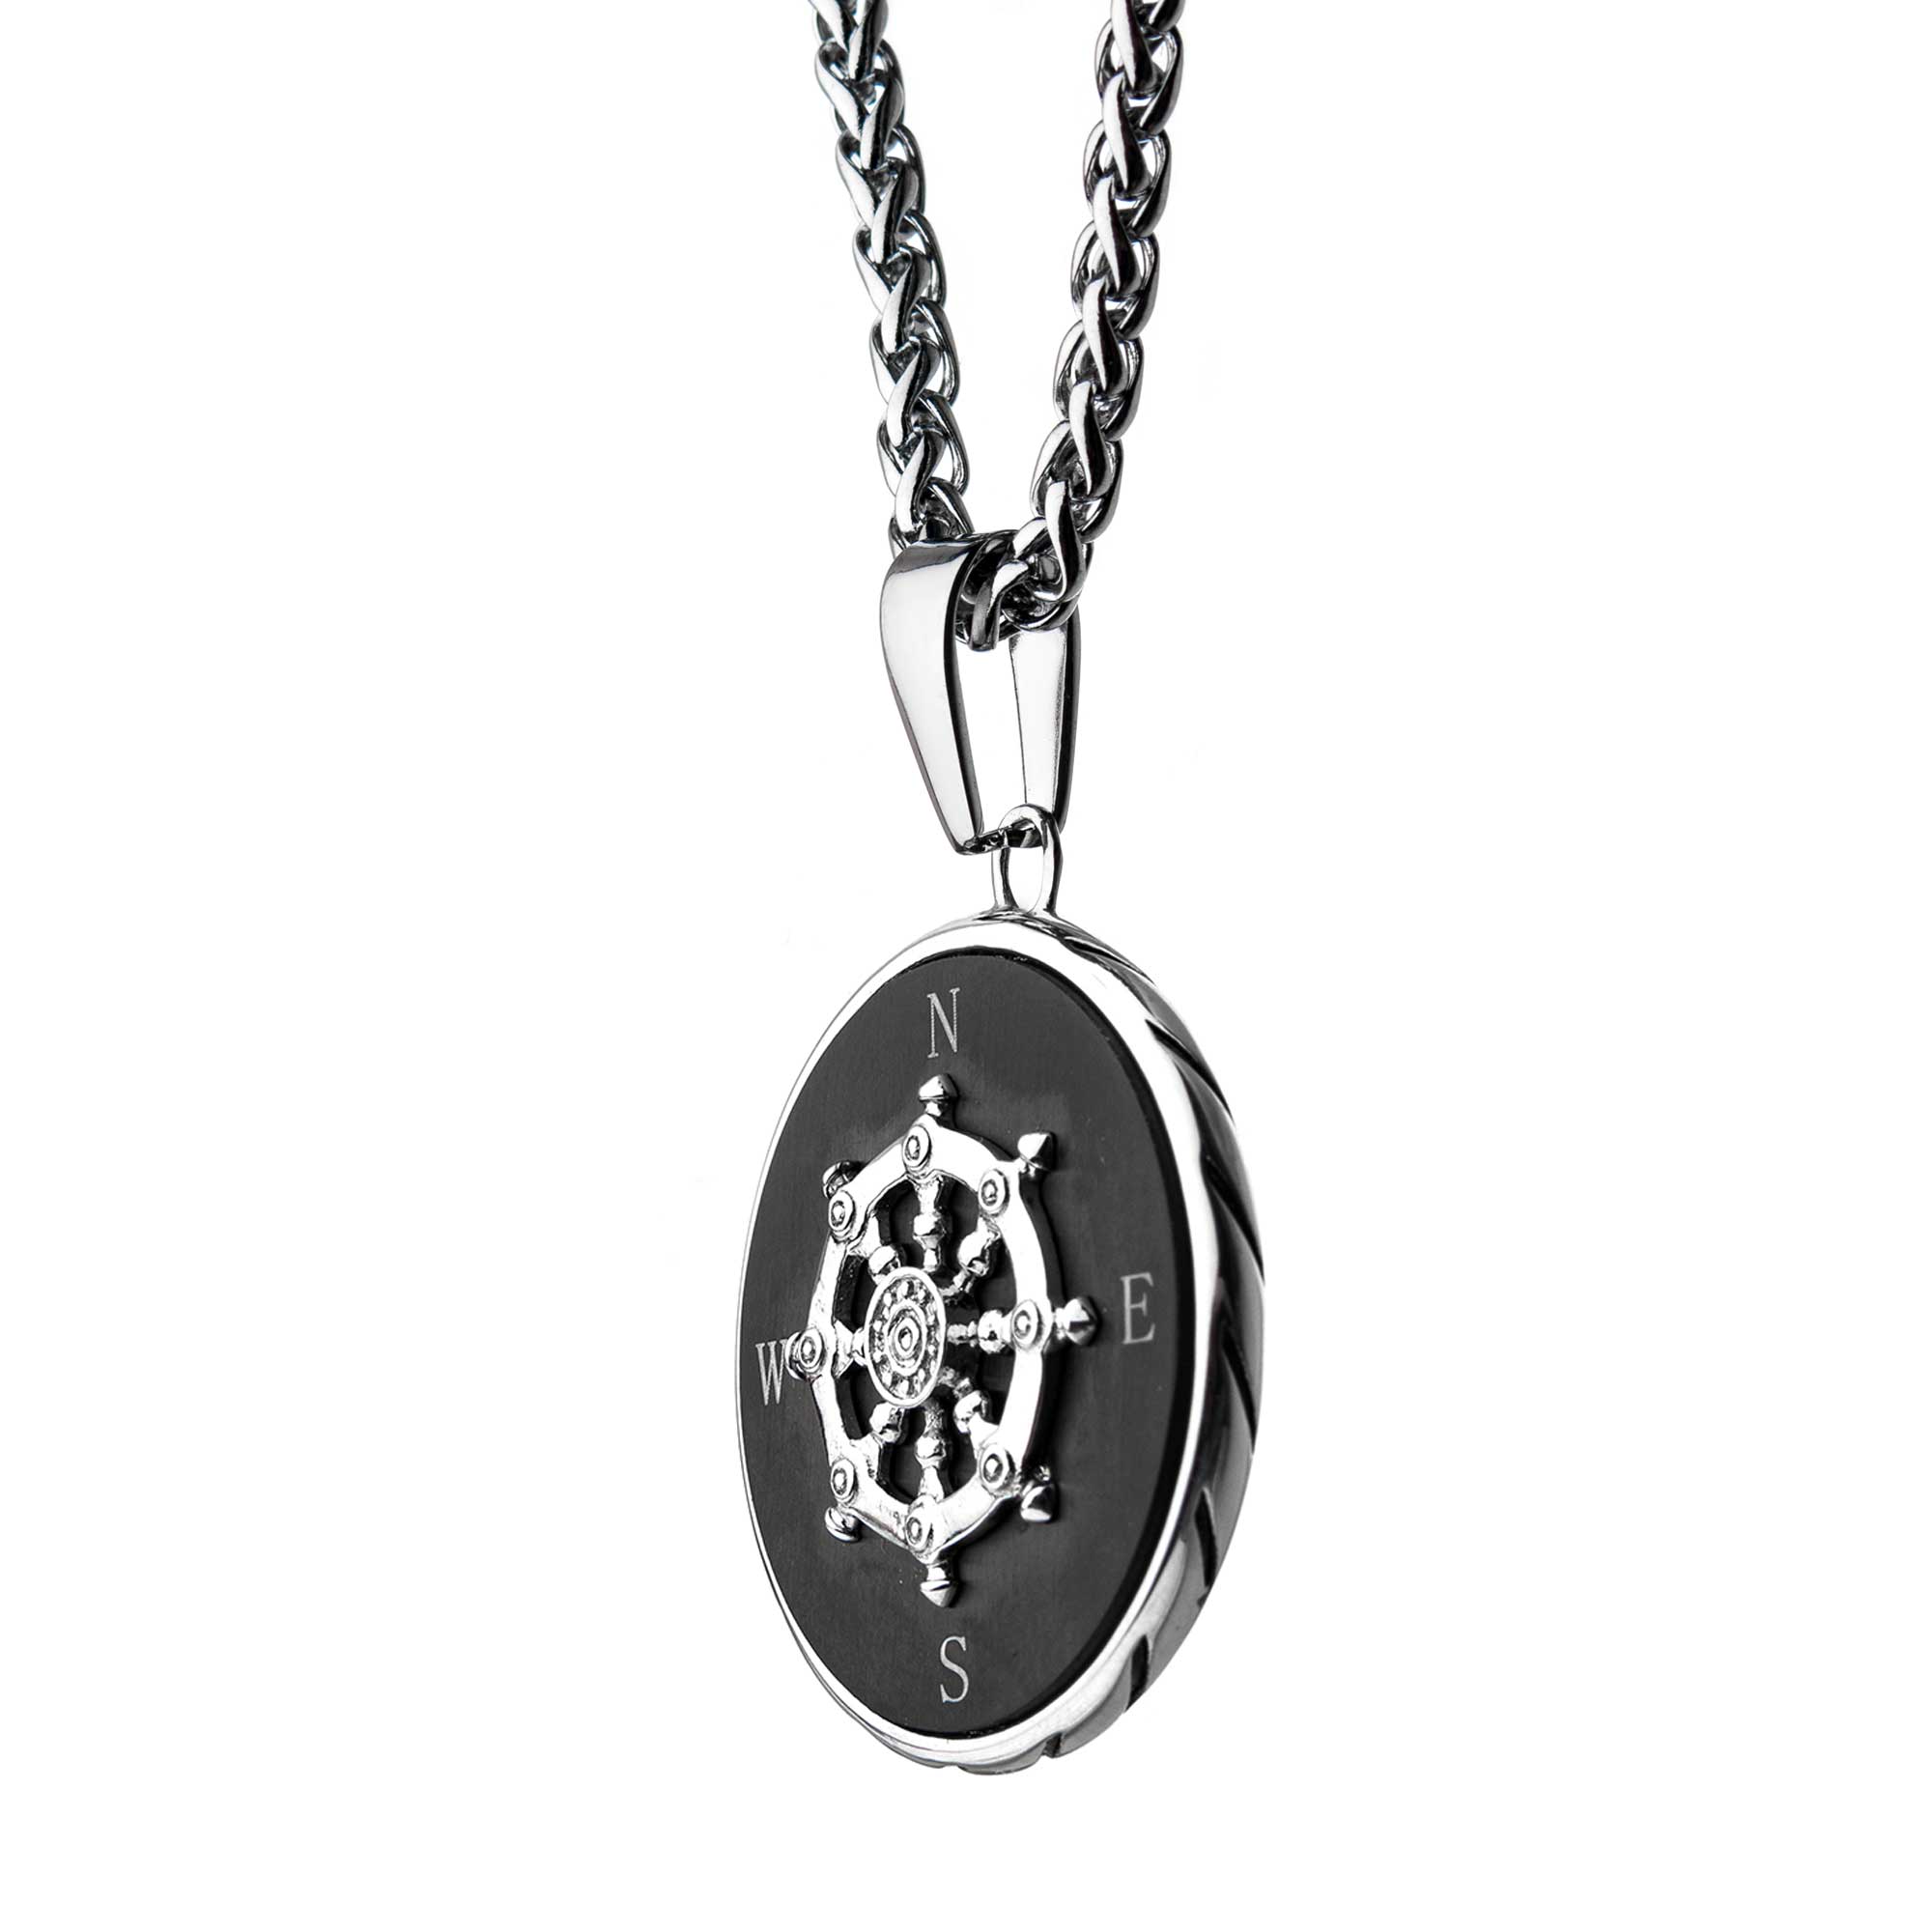 Stainless Steel Black Plated Ship's Wheel Compass Pendant with Chain Image 3 Morin Jewelers Southbridge, MA